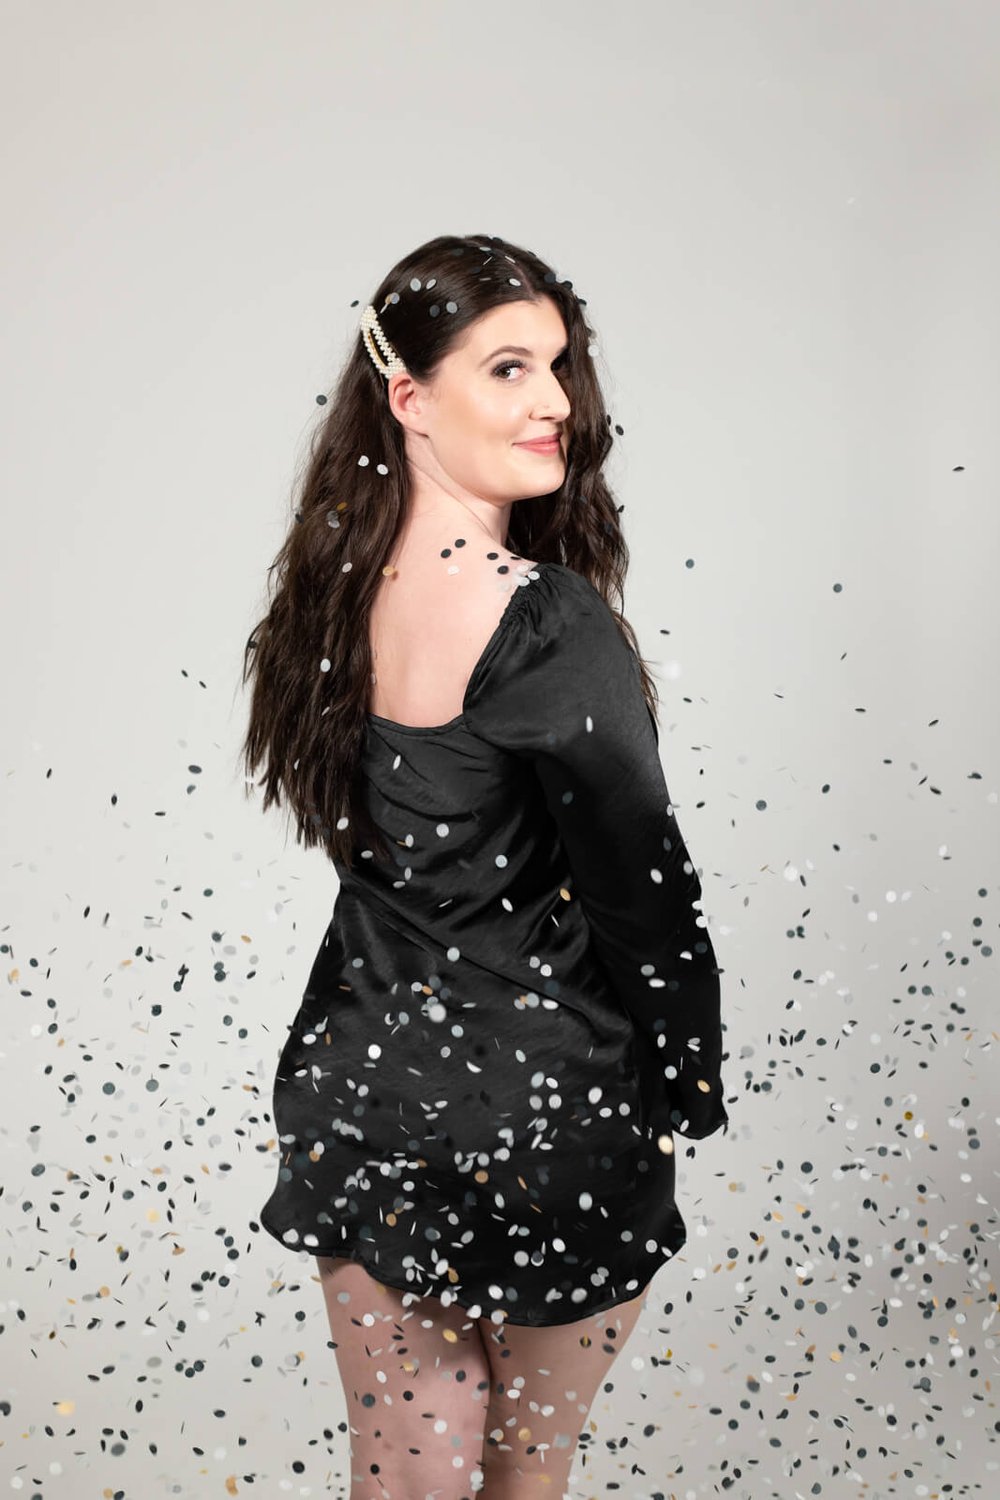 young woman in black dress with confetti falling on New Years eve